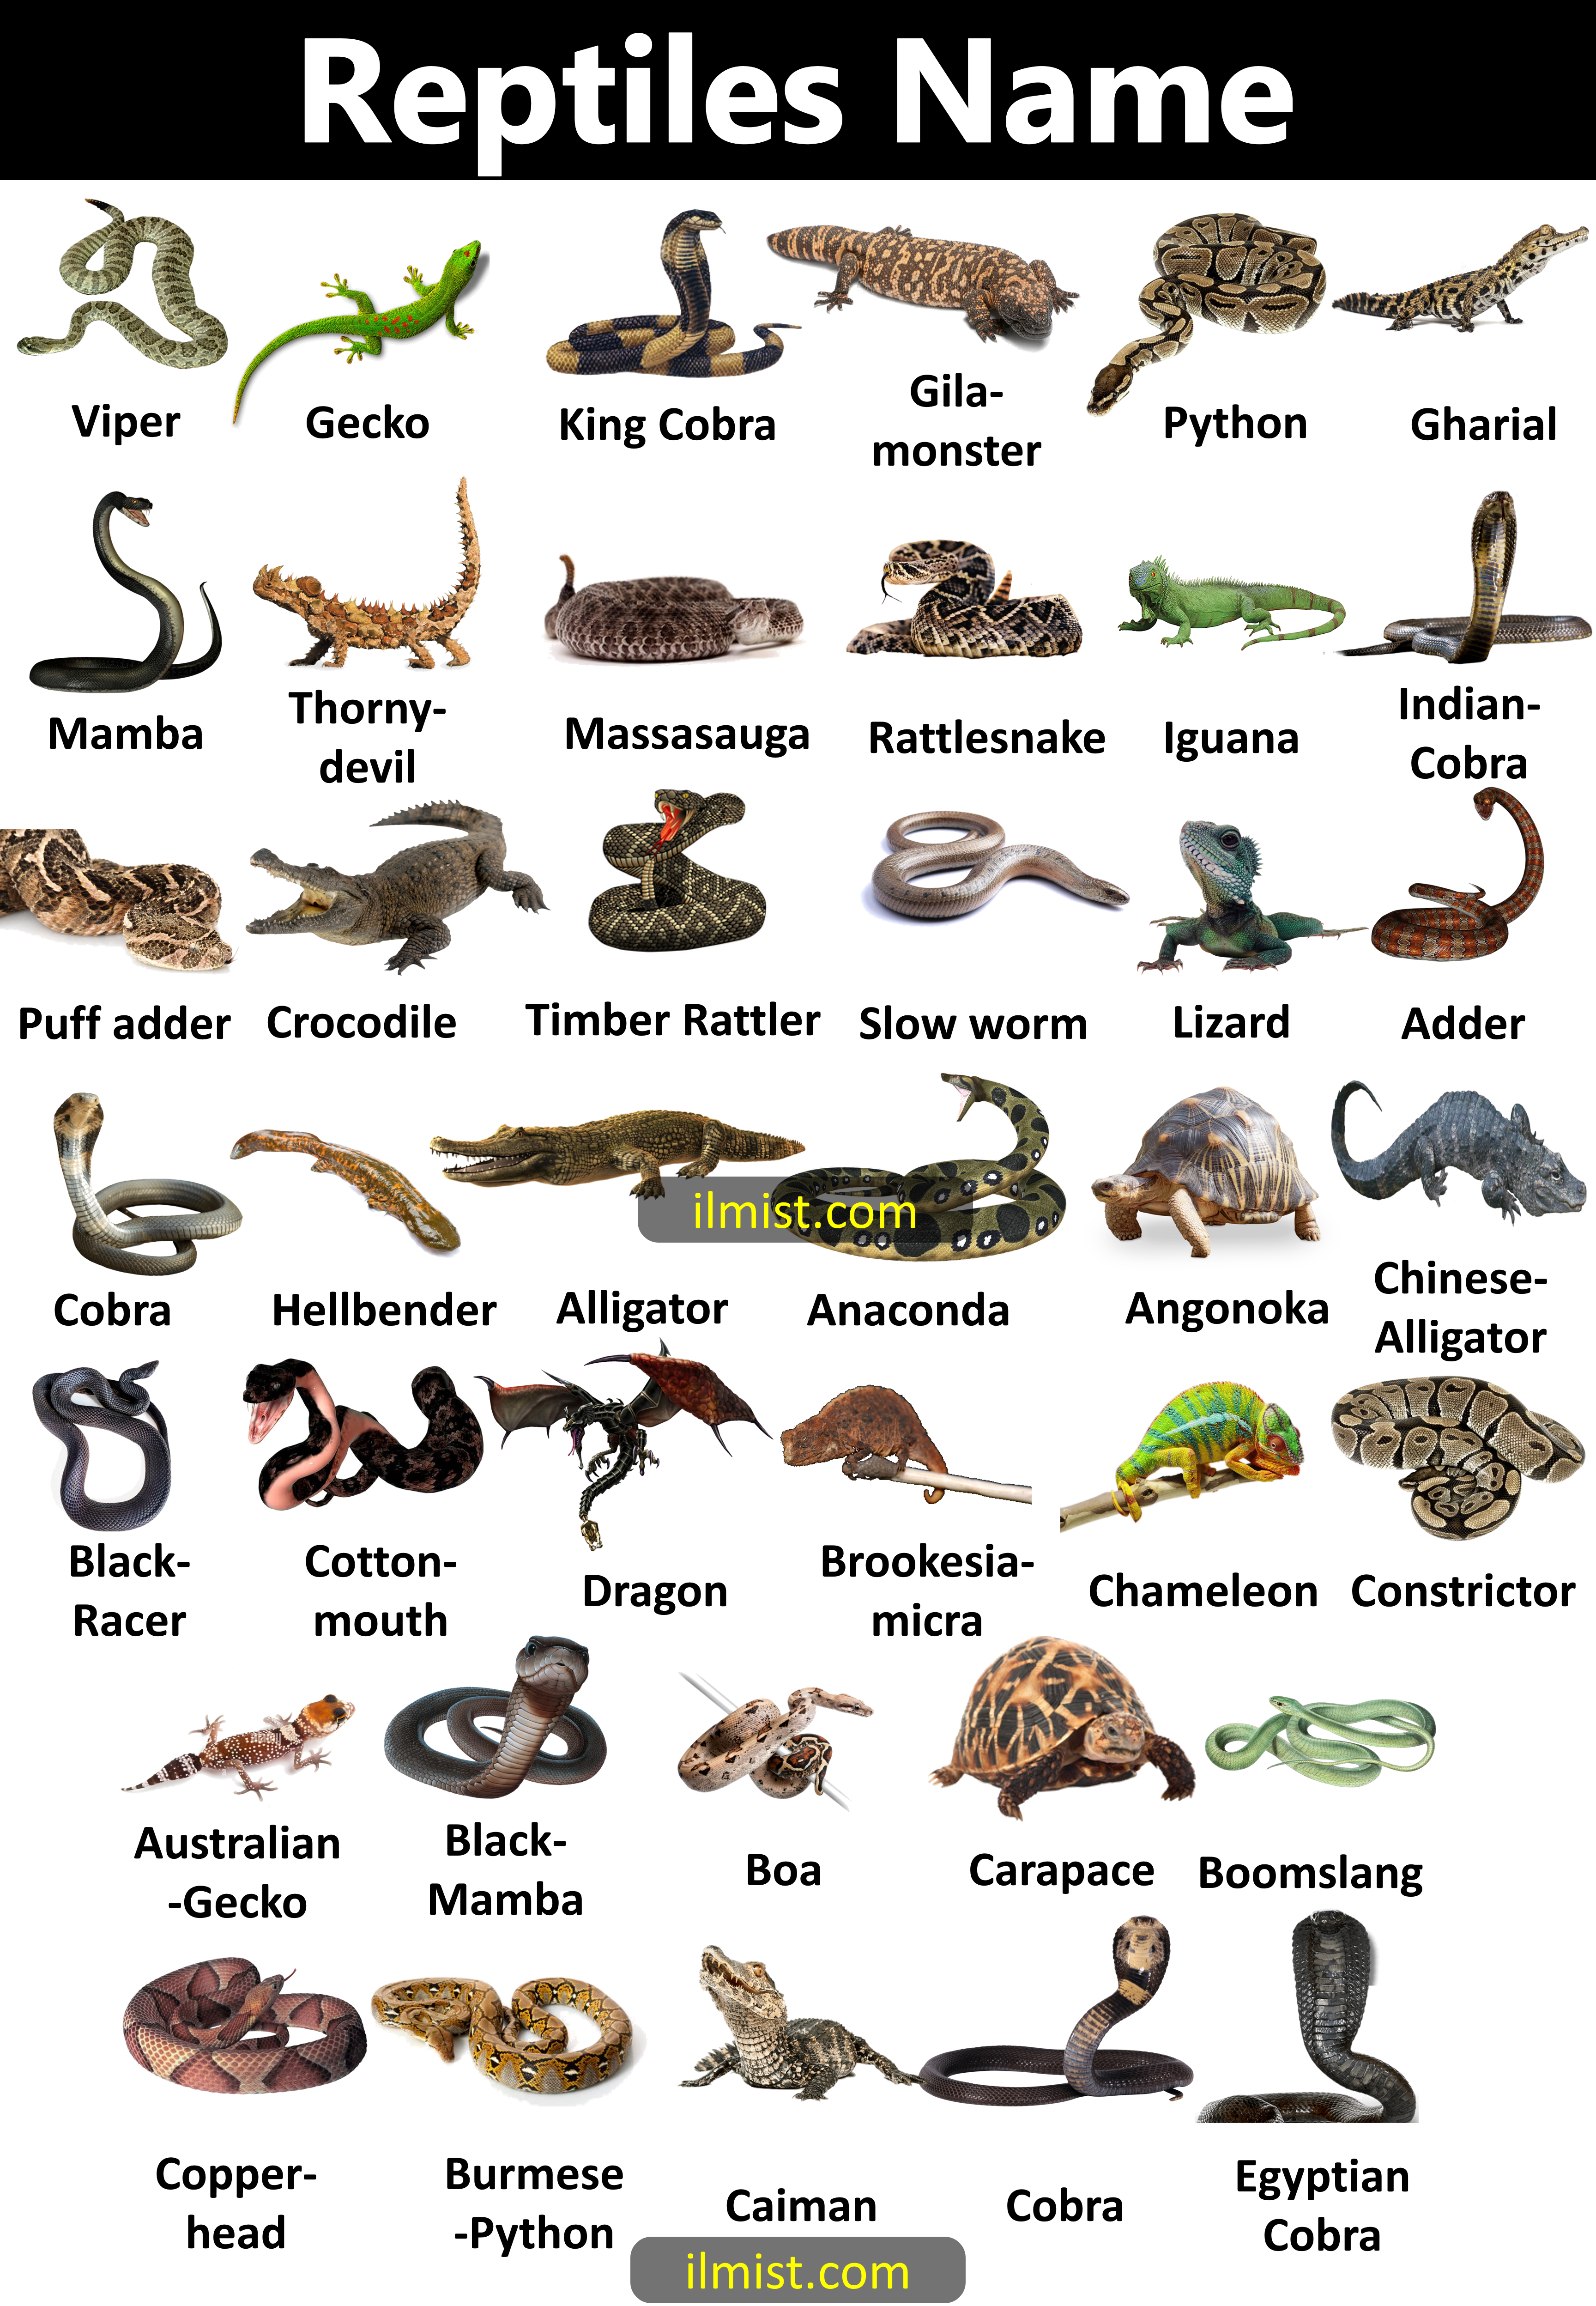 Reptiles Animals Name with Pictures and Details - ilmist